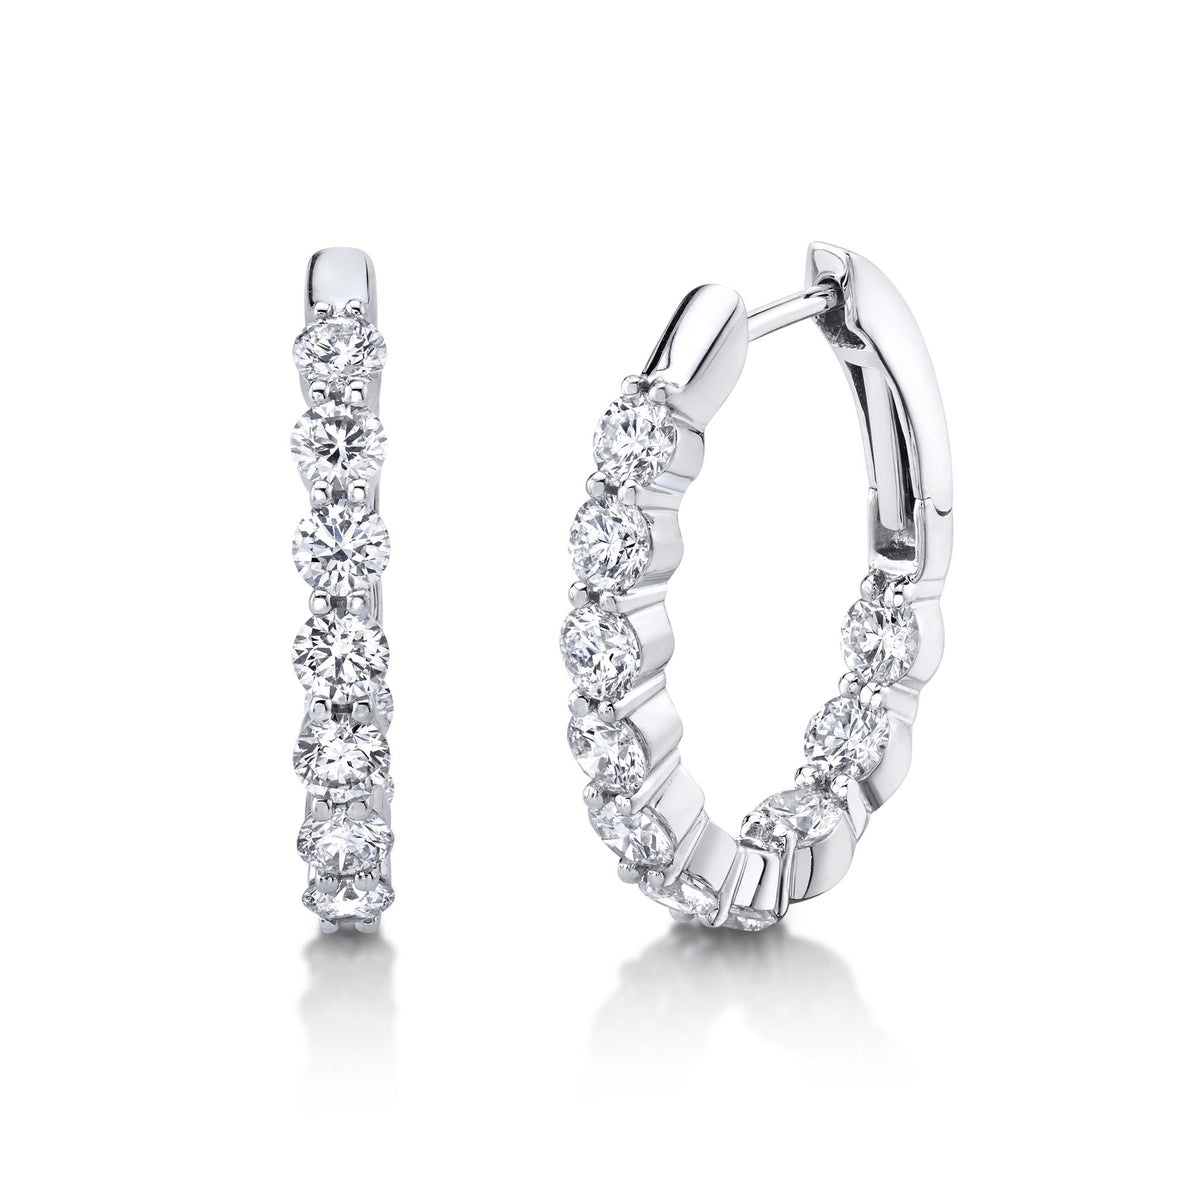 18Kt White Gold Round Hoop Earrings 2.04cttw Natural Diamonds